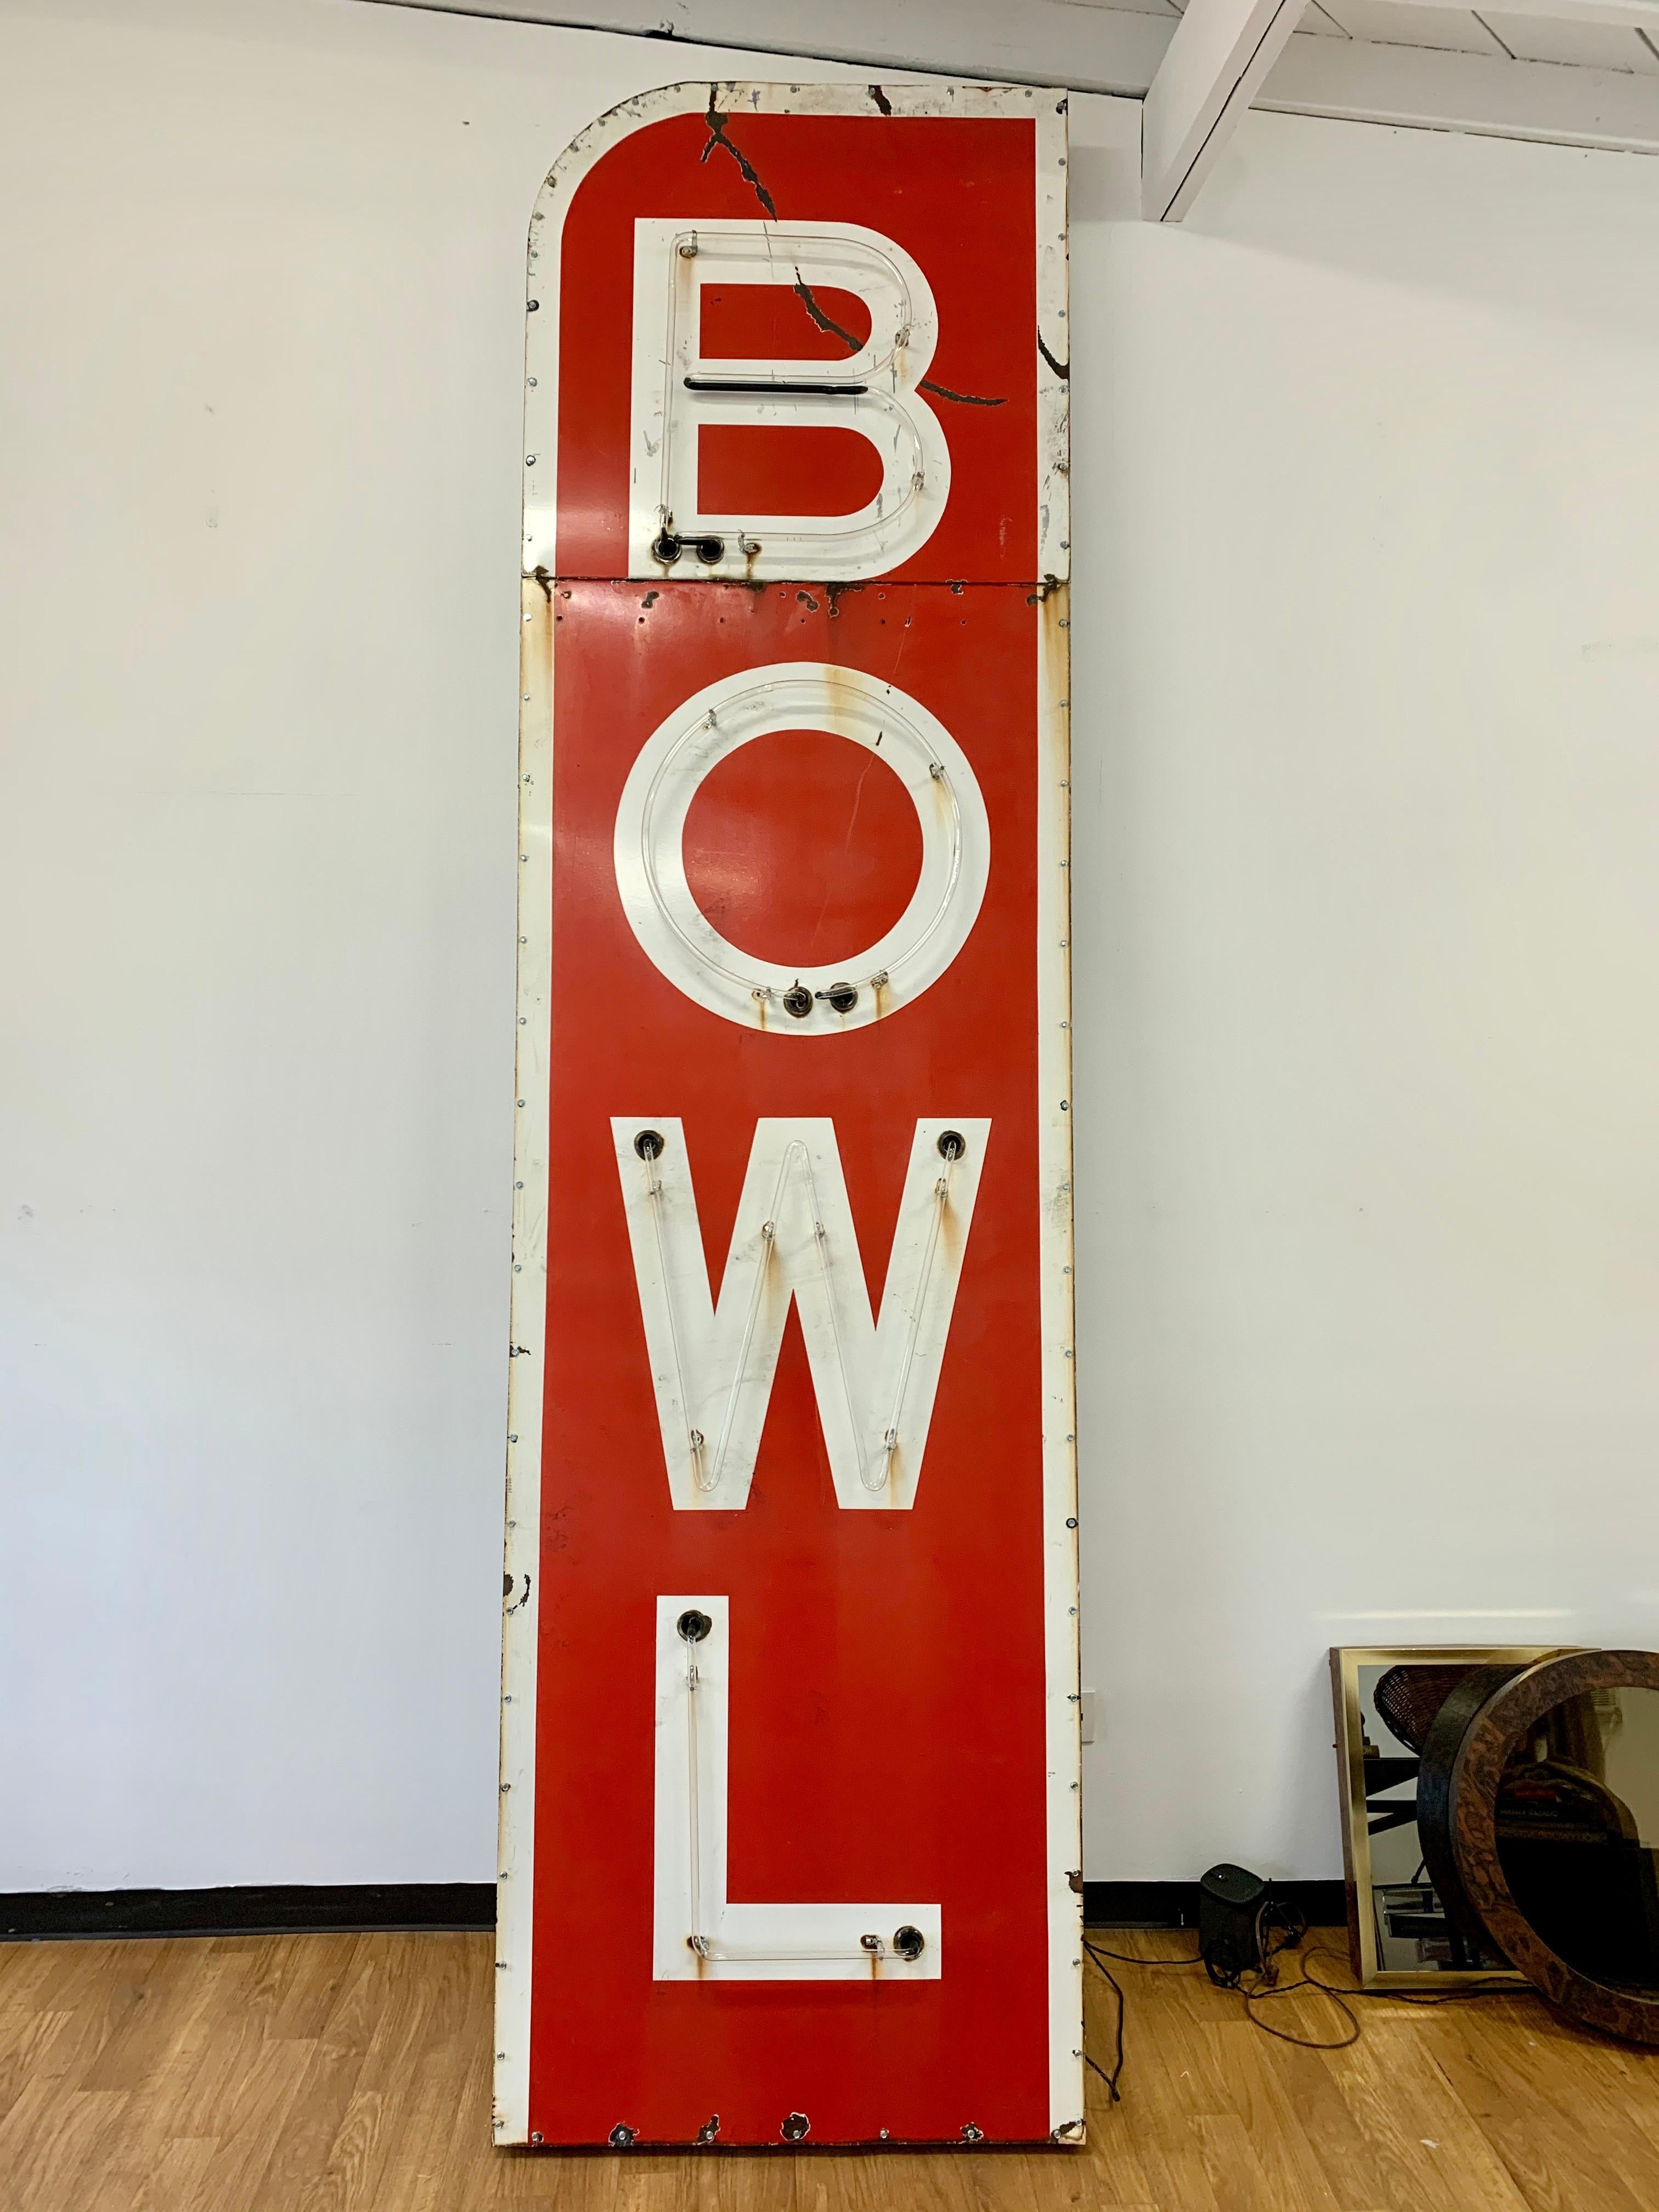 Massive 12.5 foot tall metal and neon bowling sign from the 1960s. Sign is red with white letters and white trim. Neon lights are red and illuminate letter by letter B - 0 - W - L and then blinks off and starts over. Sign was hanging for years at a